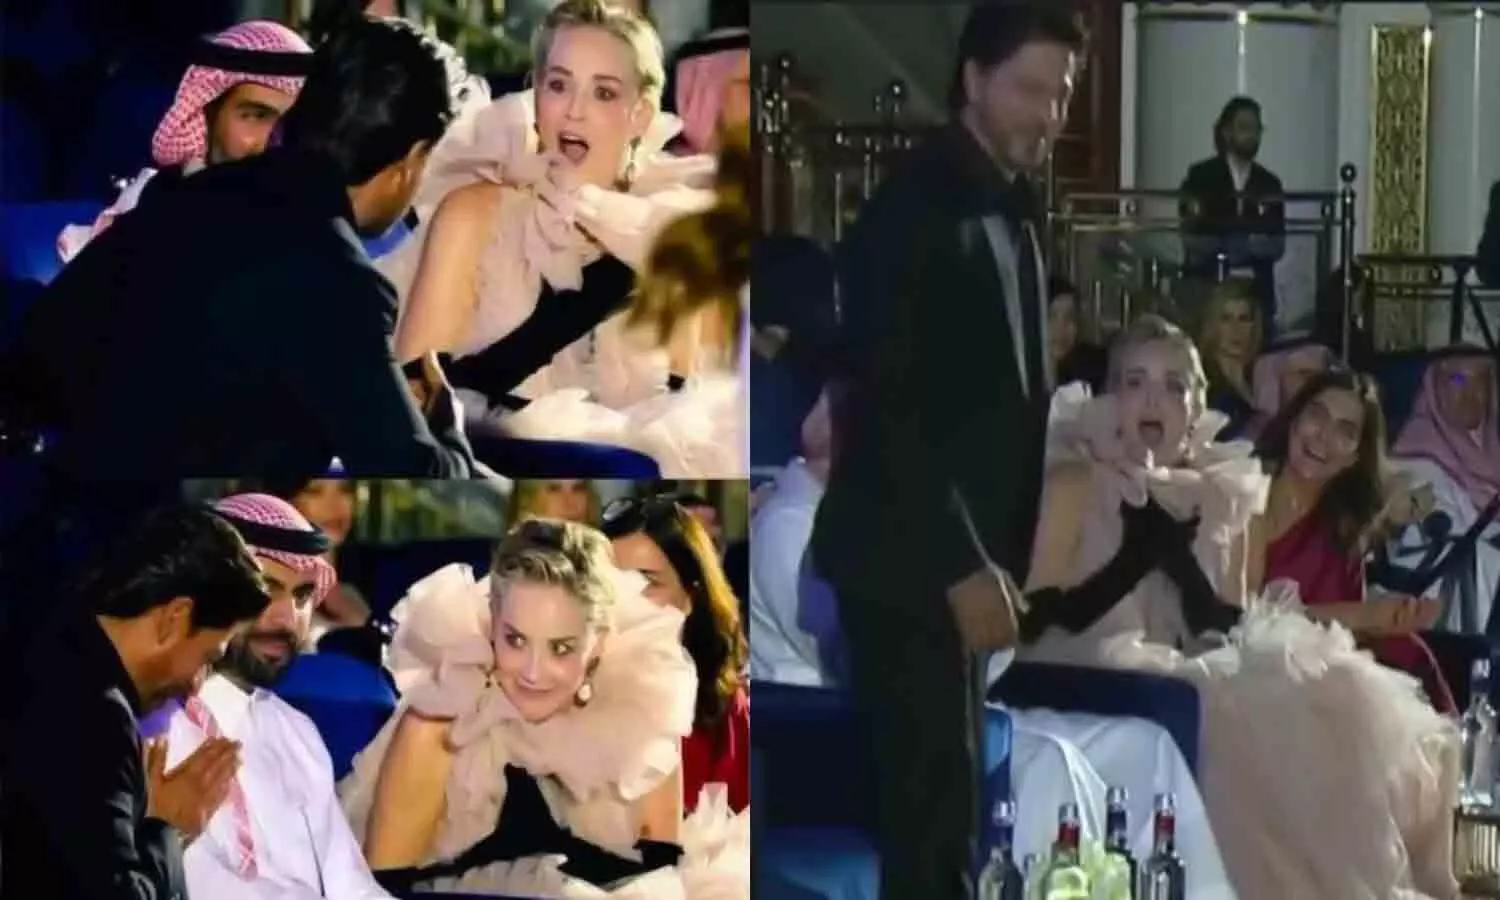 Shah Rukh Khan and Sharon Stone in Red Sea Film Festival 2022